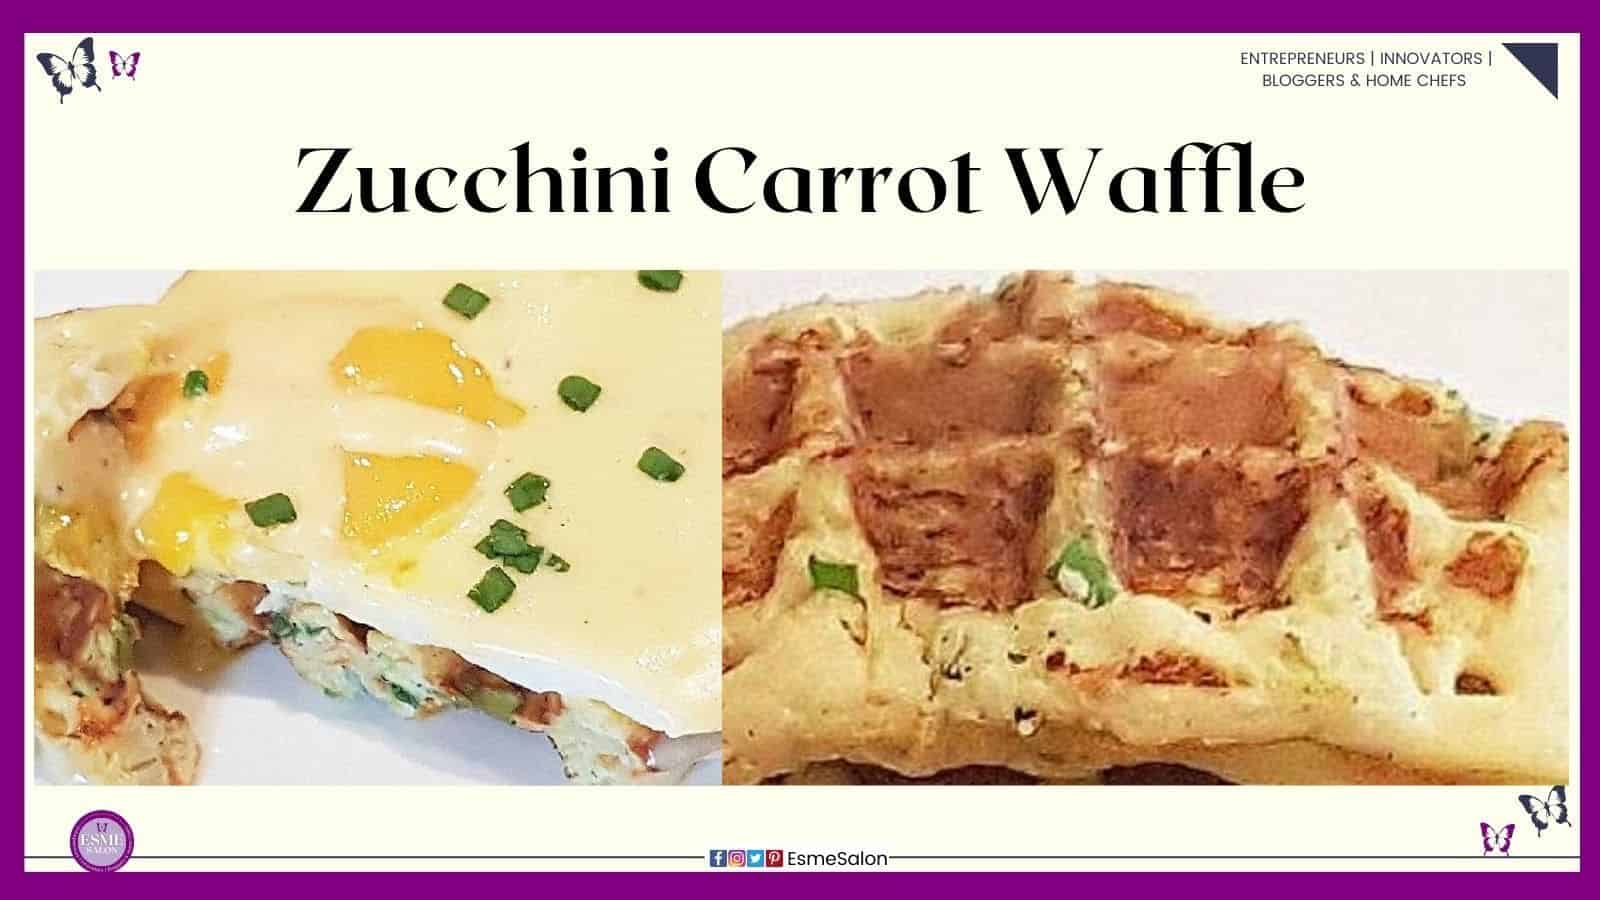 an image of a Zucchini Carrot Waffle with and without egg topping